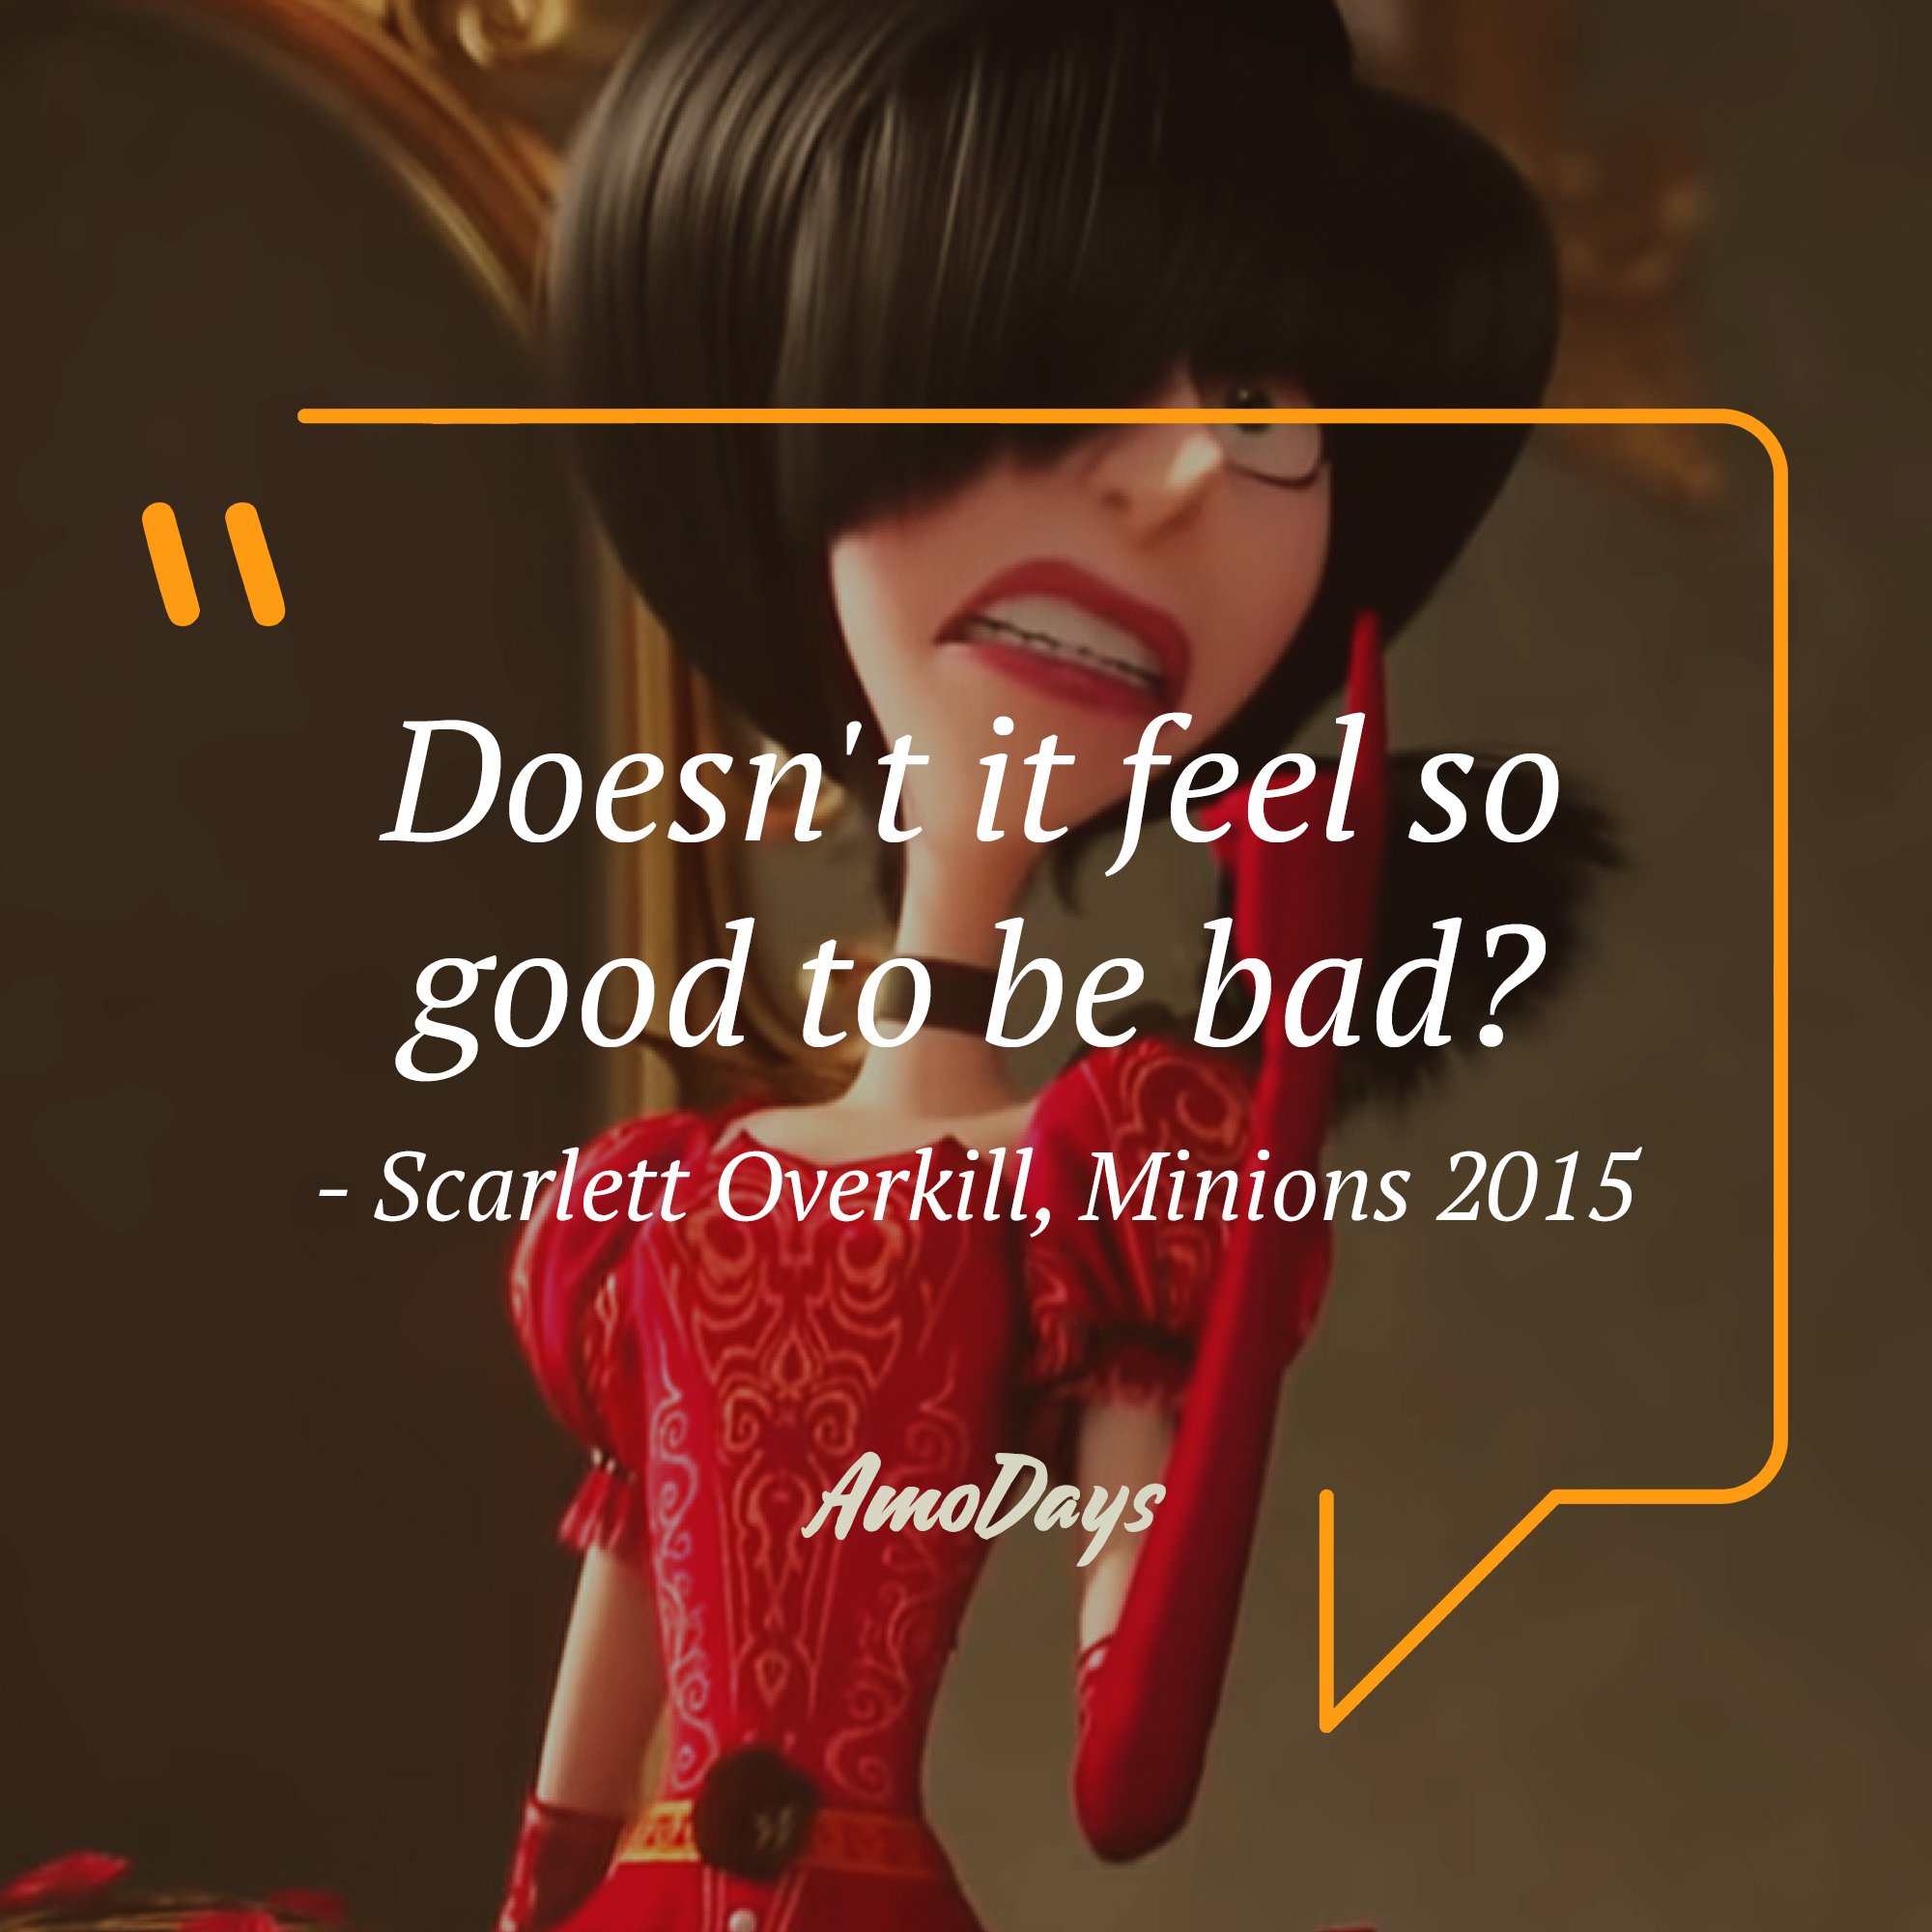 Scarlet Overkill's quote in "Minions" 2015 “Does it feel so good to be bad?” | Image: AmoDays